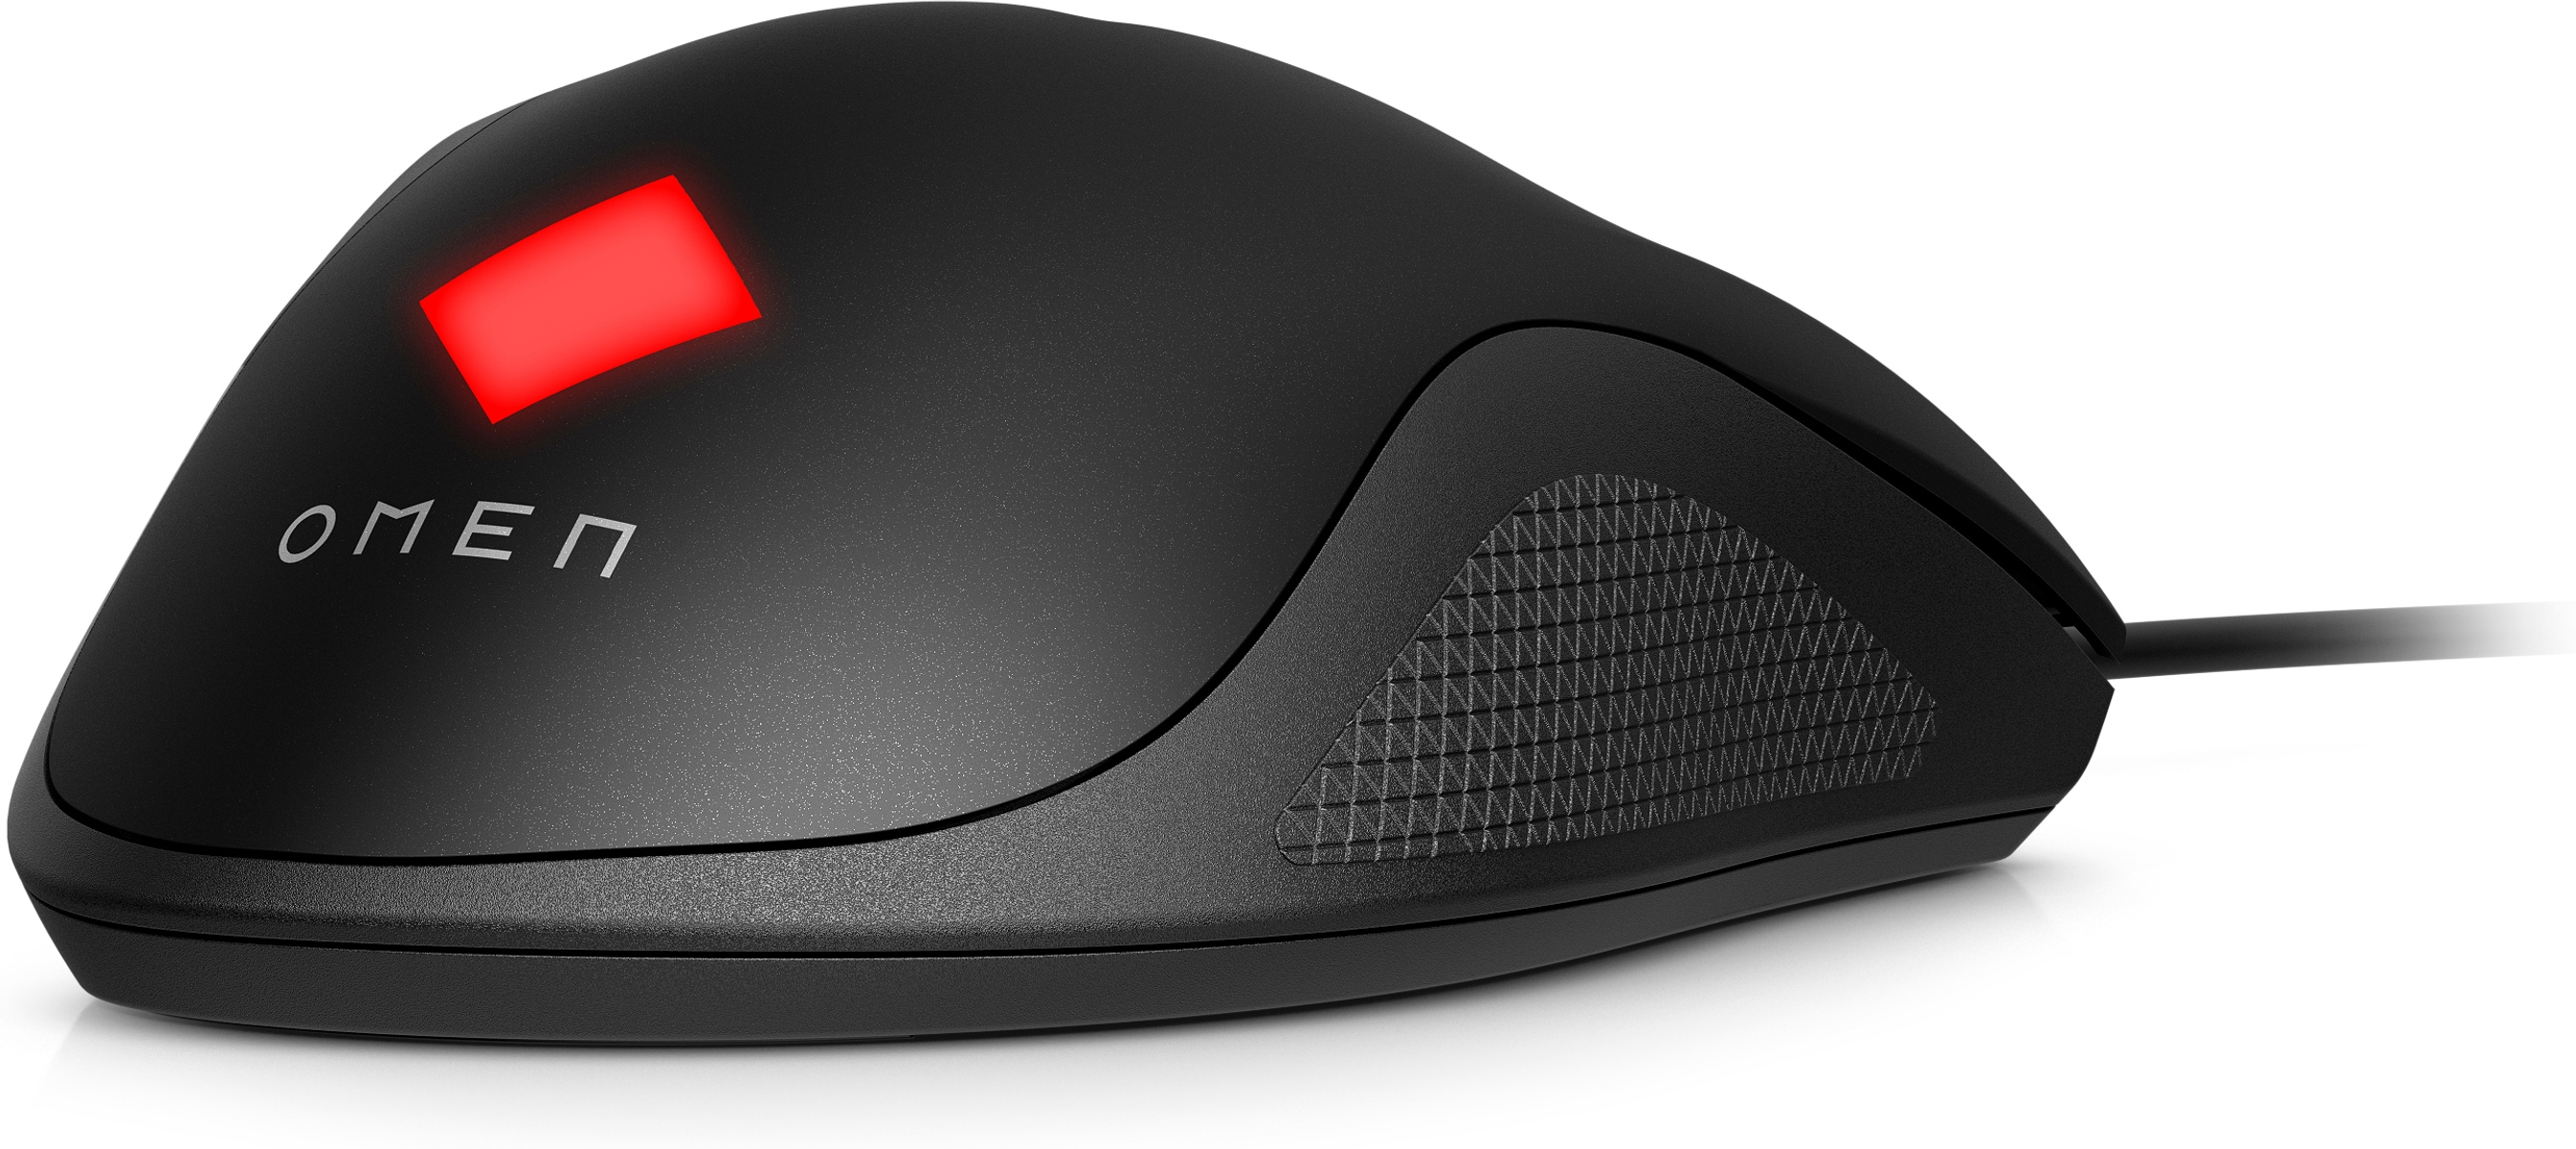 GAMING MOUSE Gaming-Maus, OMEN ESSENTIAL Schwarz 8BC52AA VECTOR HP